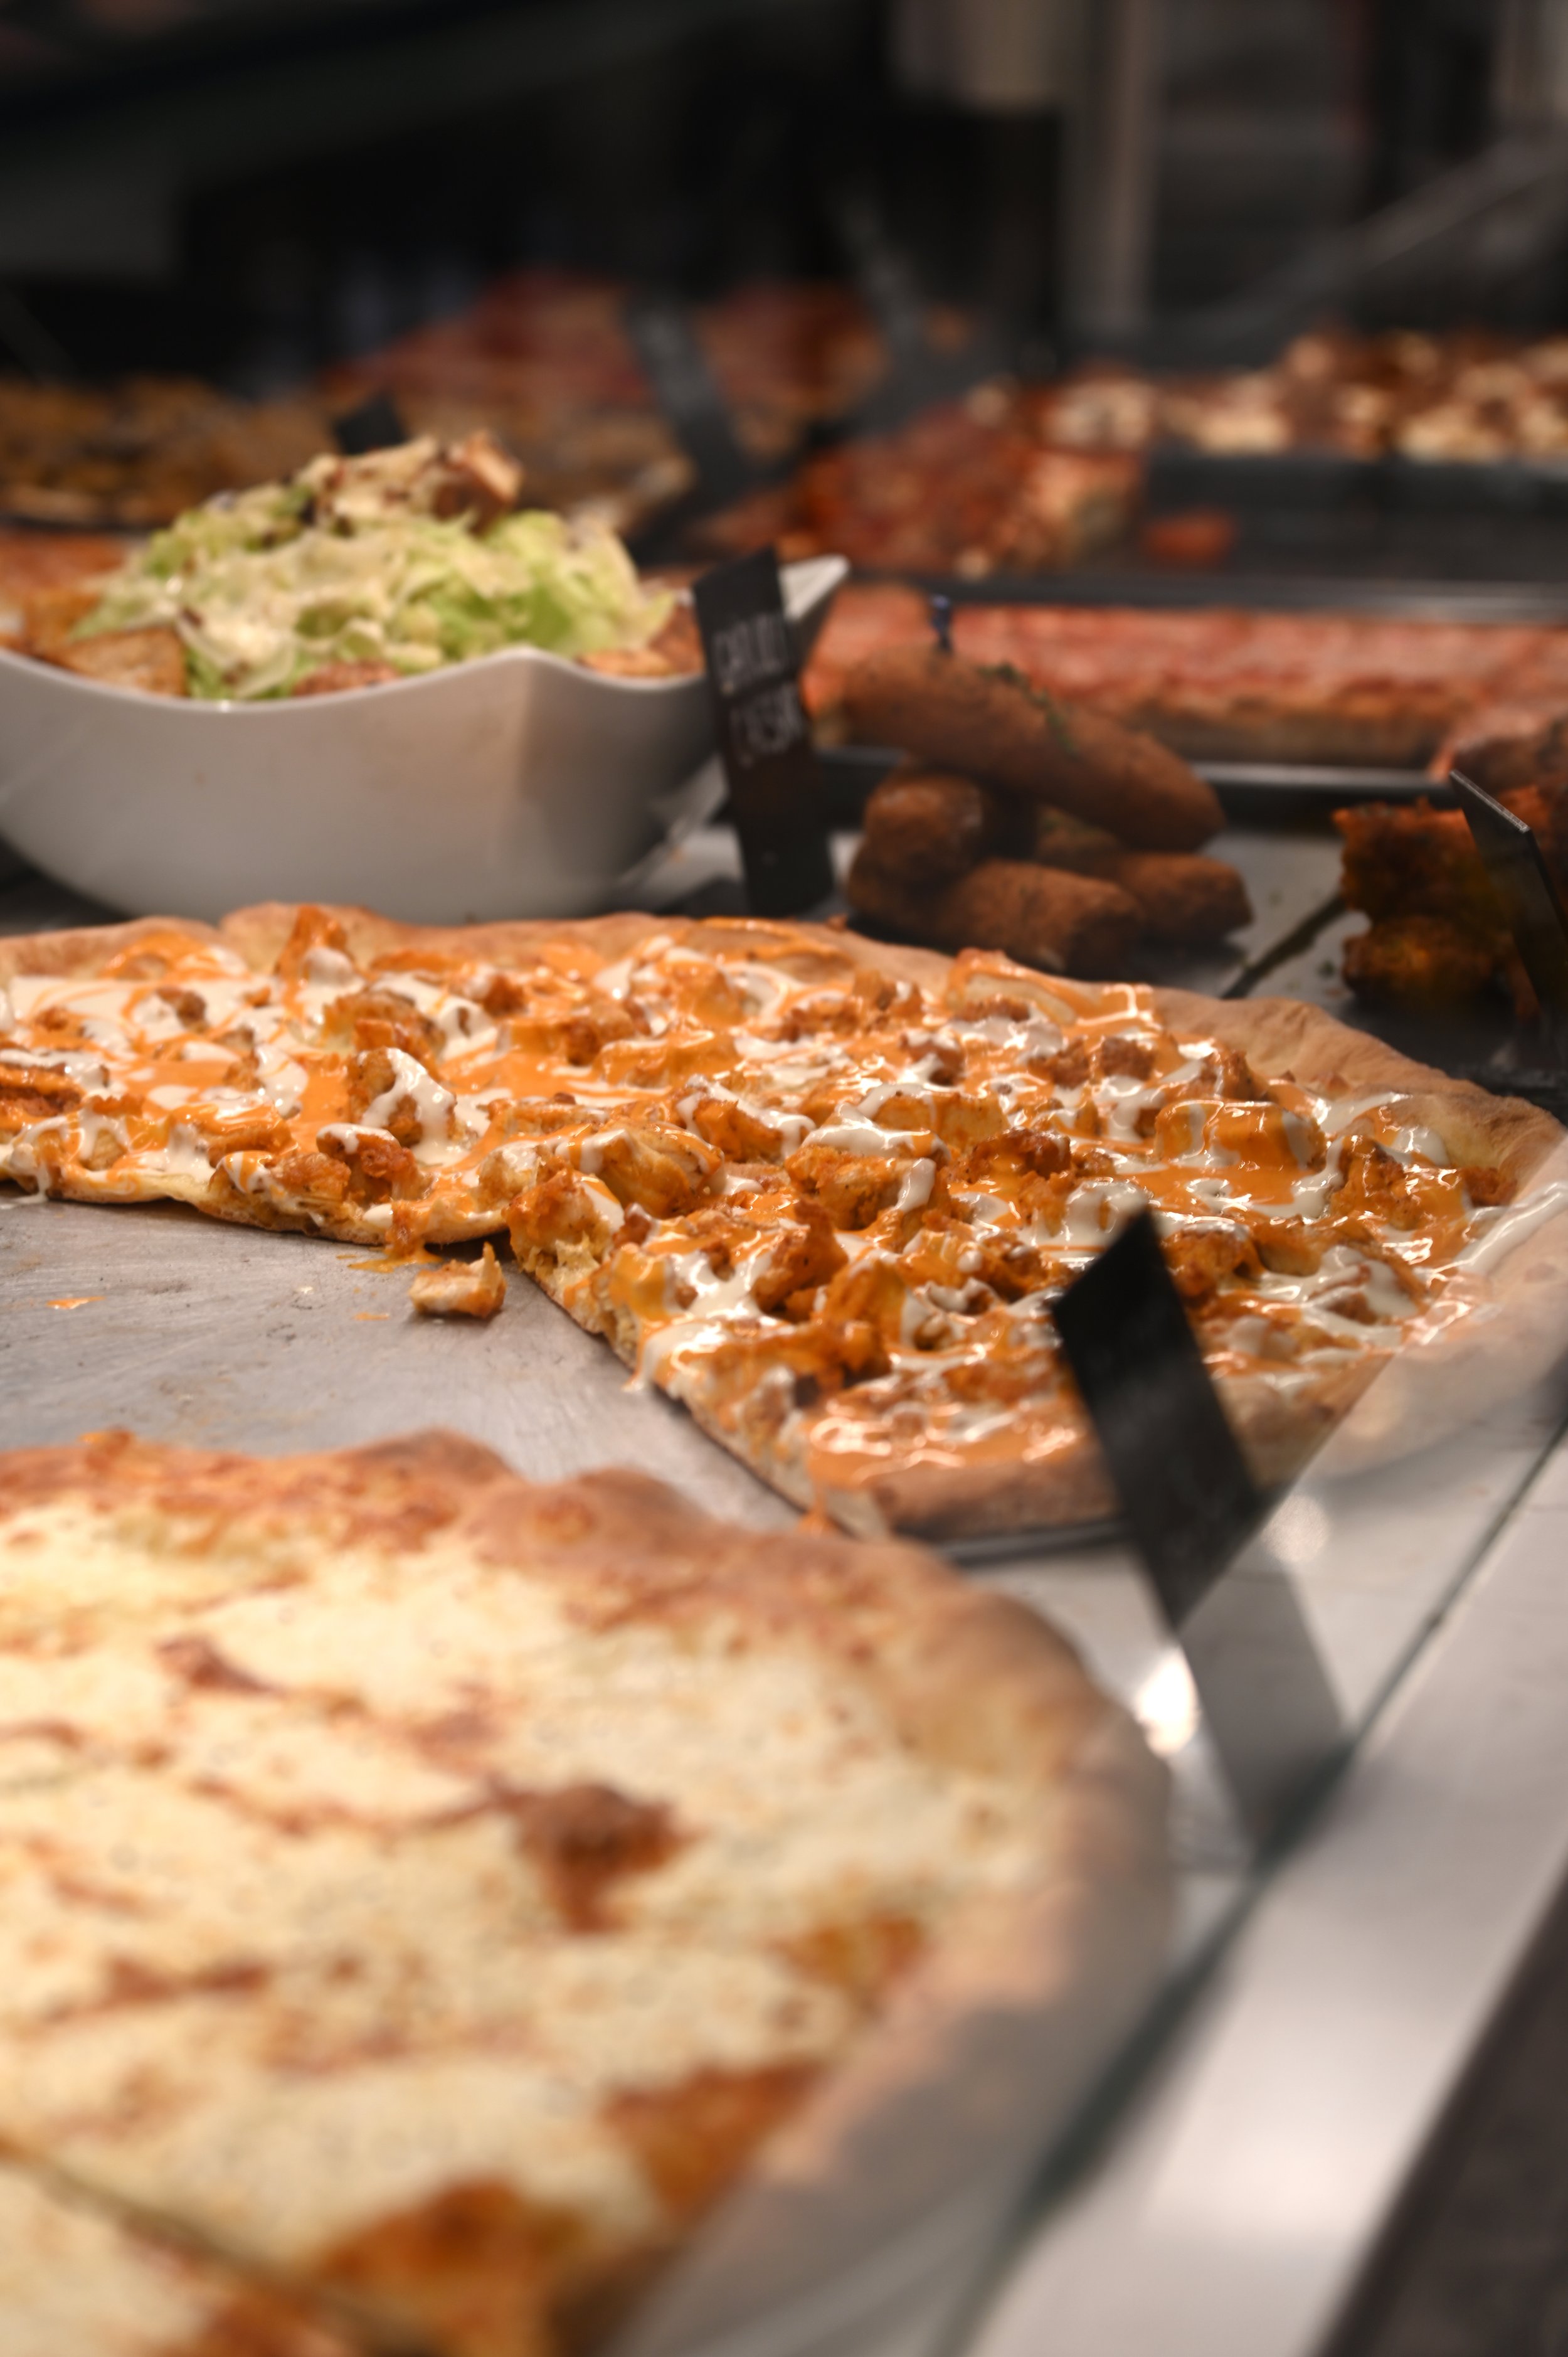  Siena Pizza and Cannoli has many different pizza pie flavors, featuring their Buffalo Chicken Pizza, a bestseller at the restaurant in the Financial District of Manhattan, NY on Oct. 12, 2021. (Alyse Messmer/The King's College) 